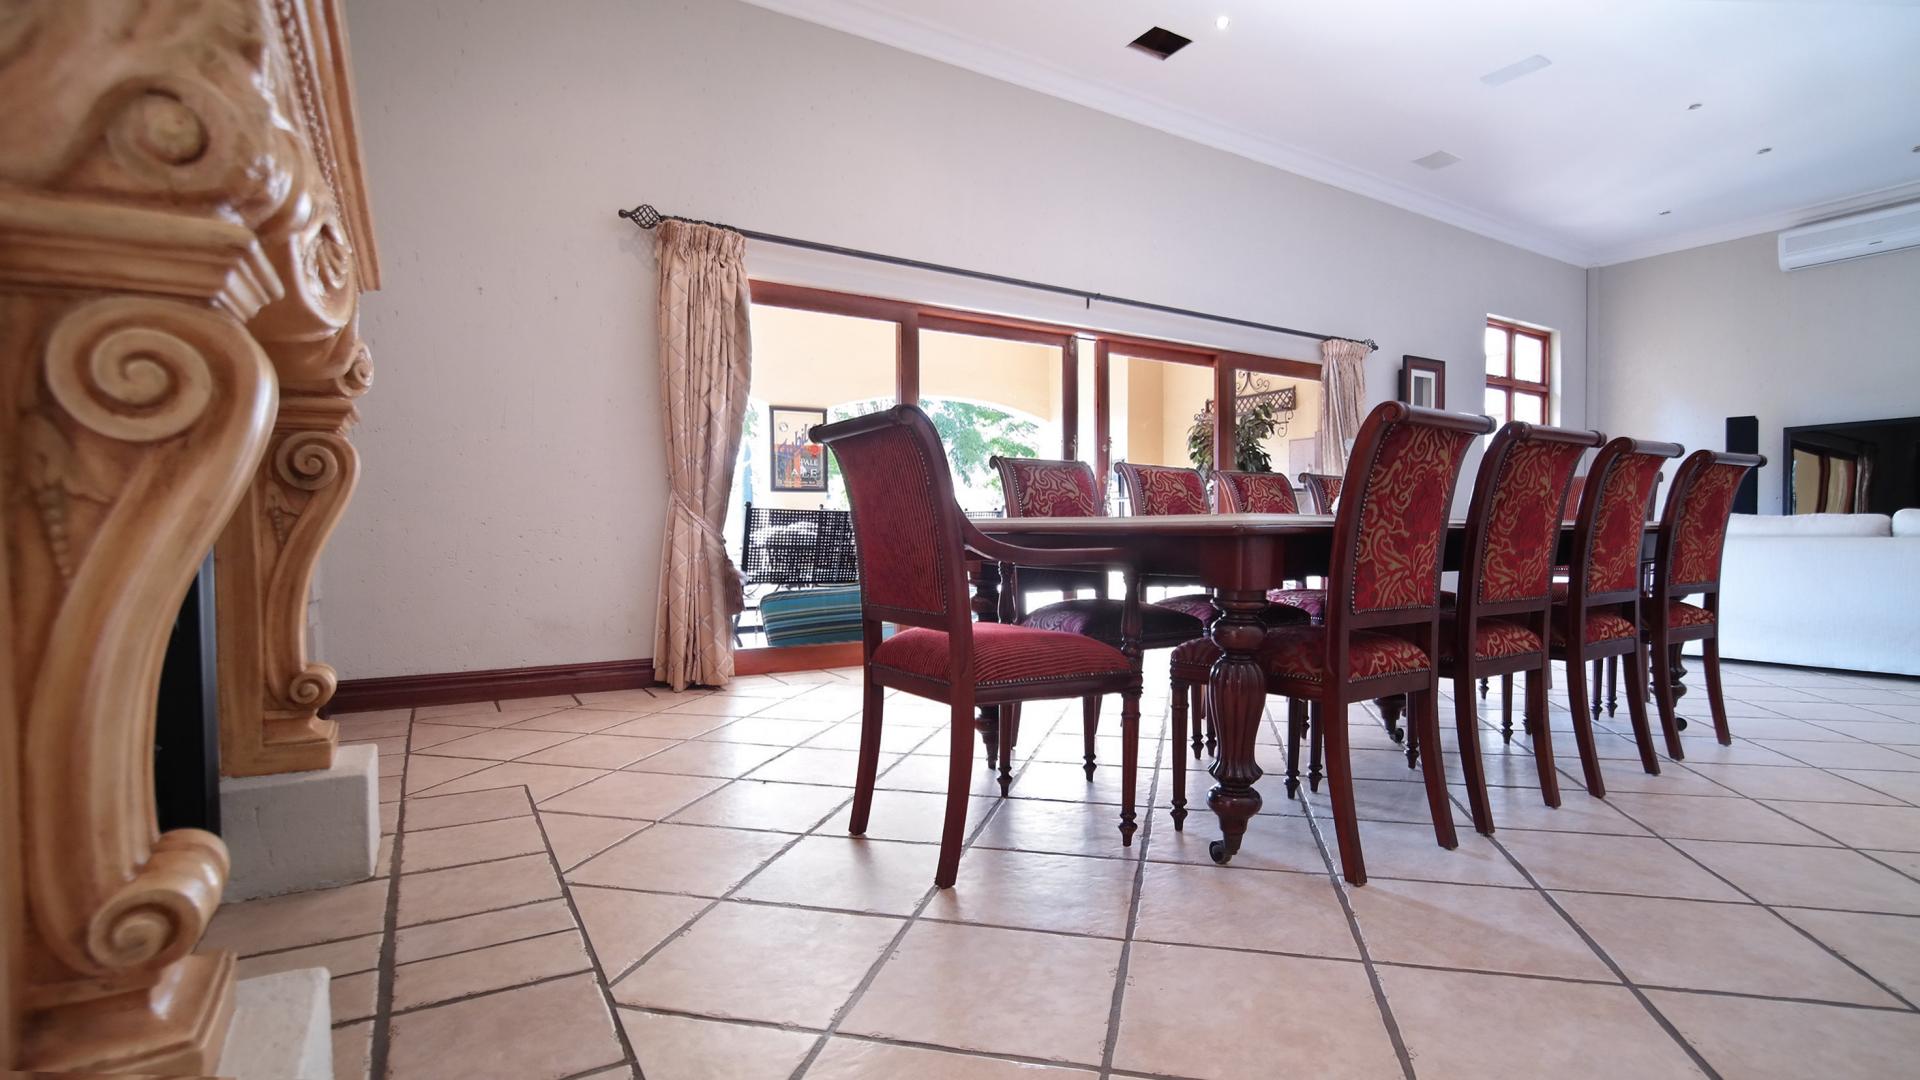 Dining Room - 34 square meters of property in Silver Lakes Golf Estate